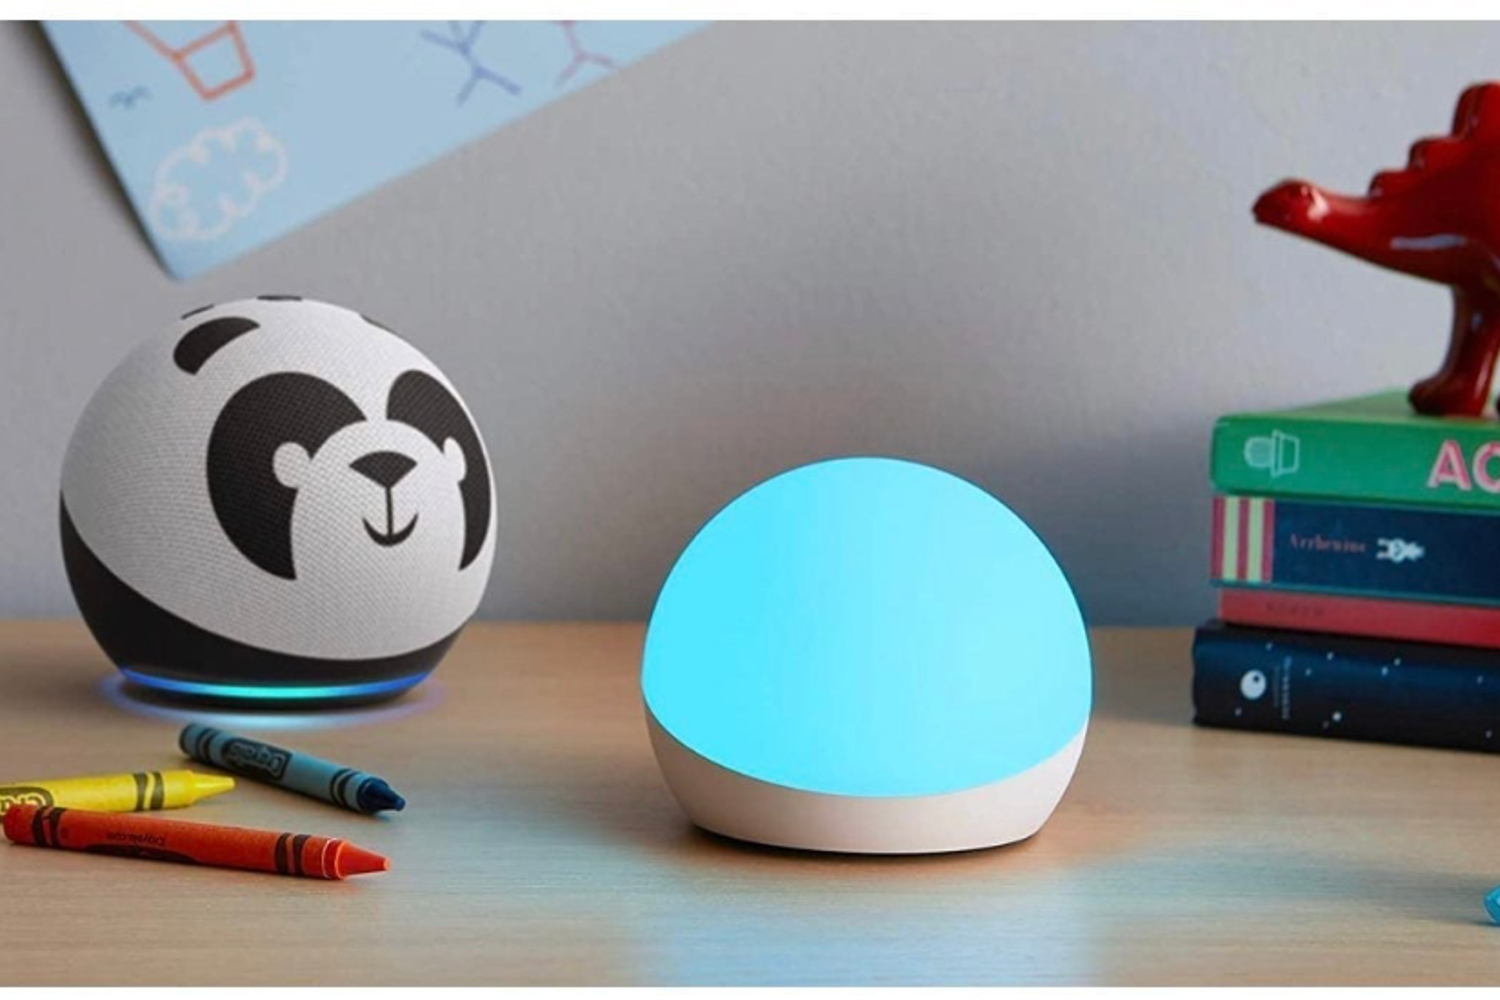 Prime Day: Get this Echo Dot and Nightlight Bundle for $36